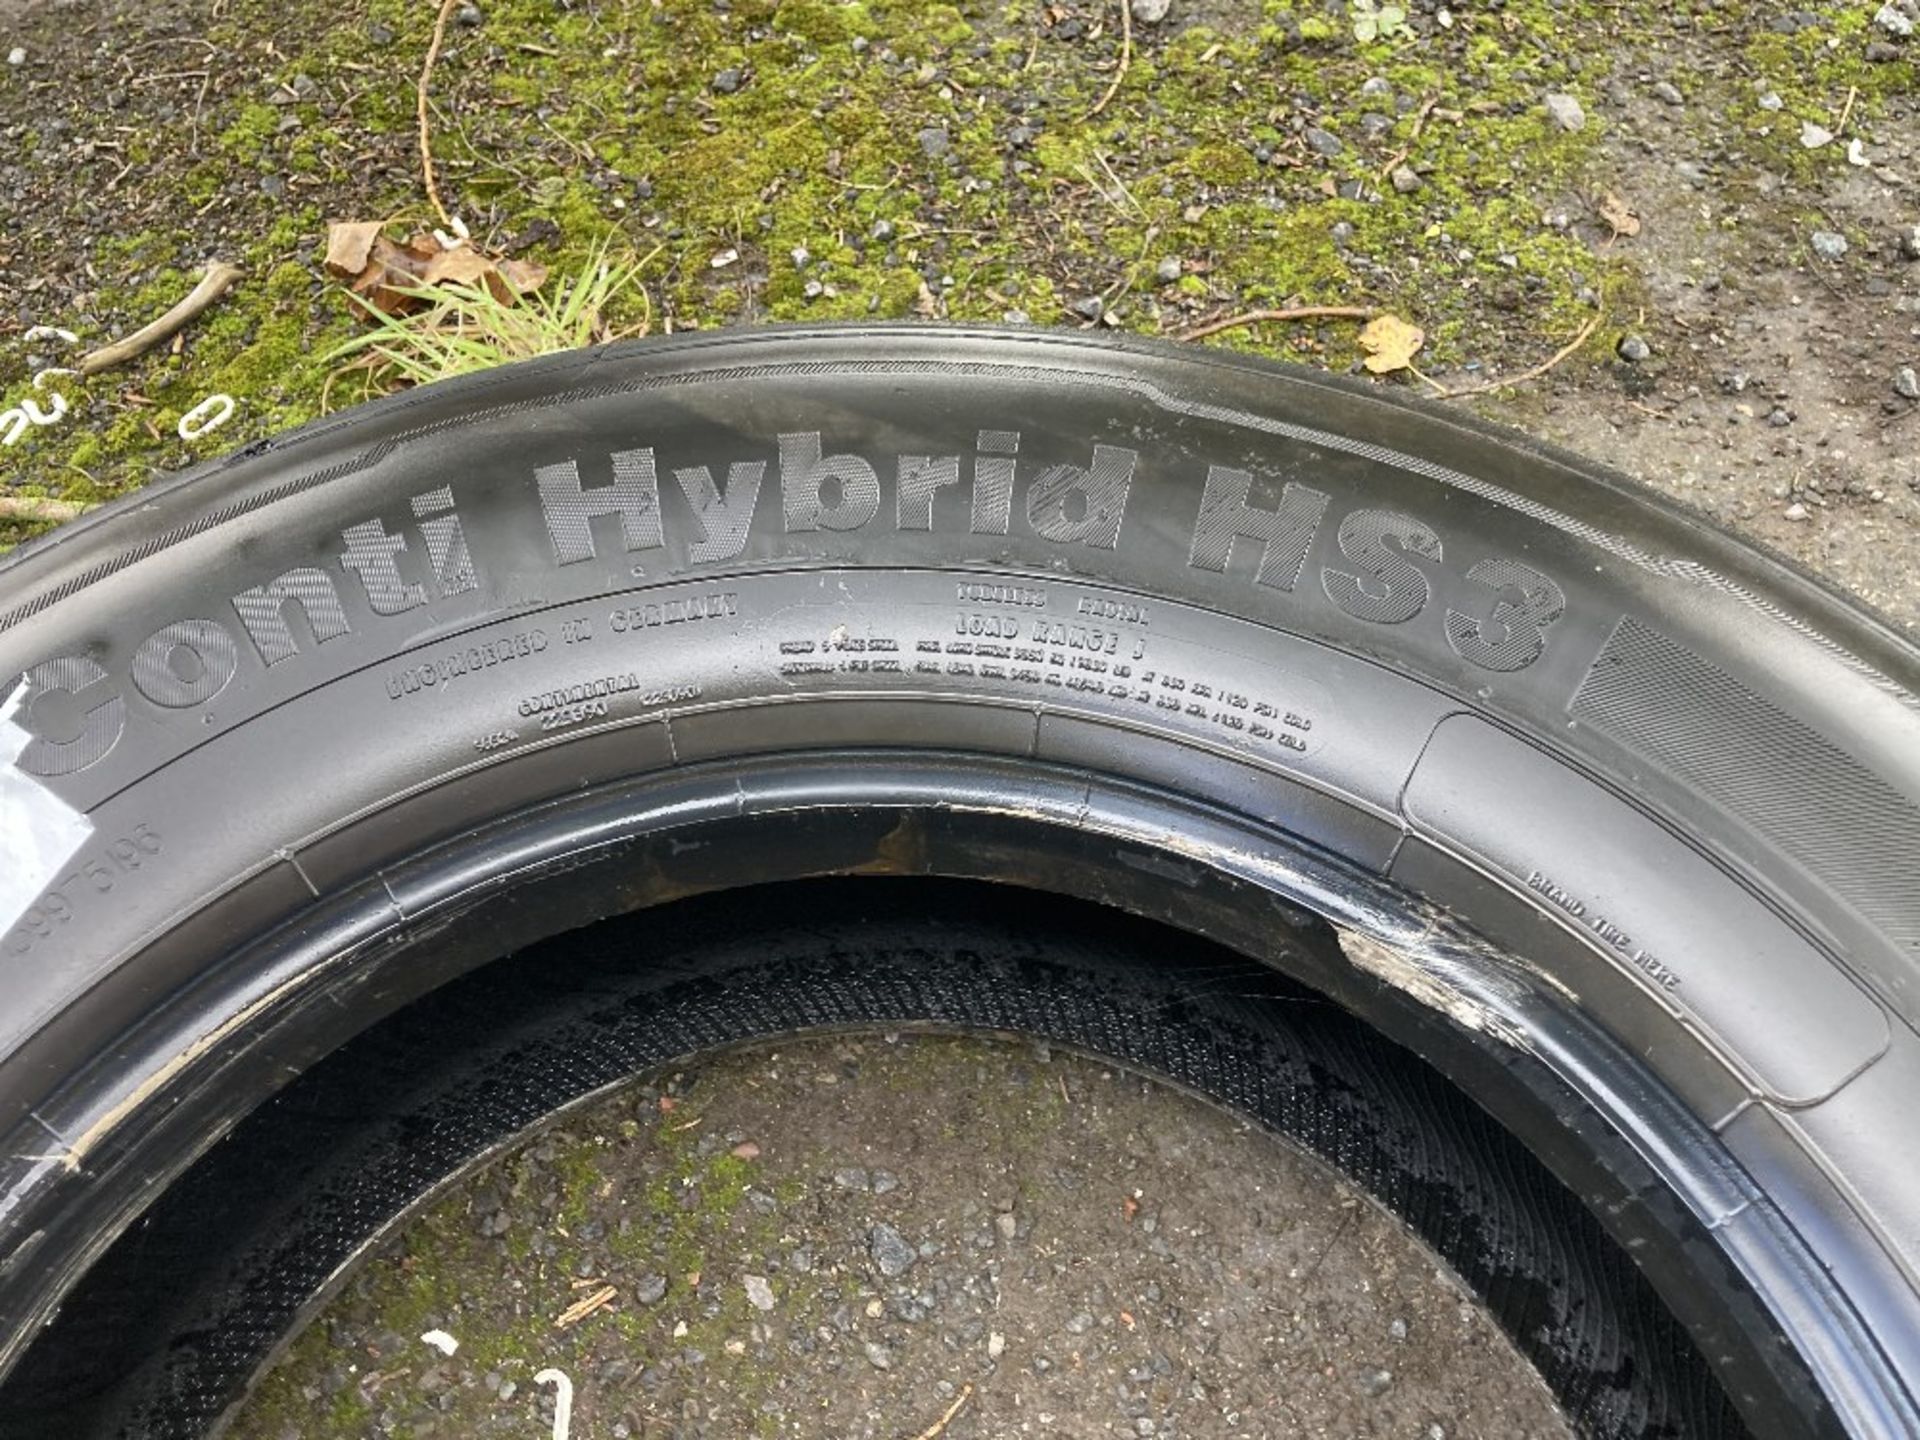 Continental Conti Hybrid HS3 XL 315/70R 22.5 radial tubeless regroovable HGV tyre - Image 5 of 6